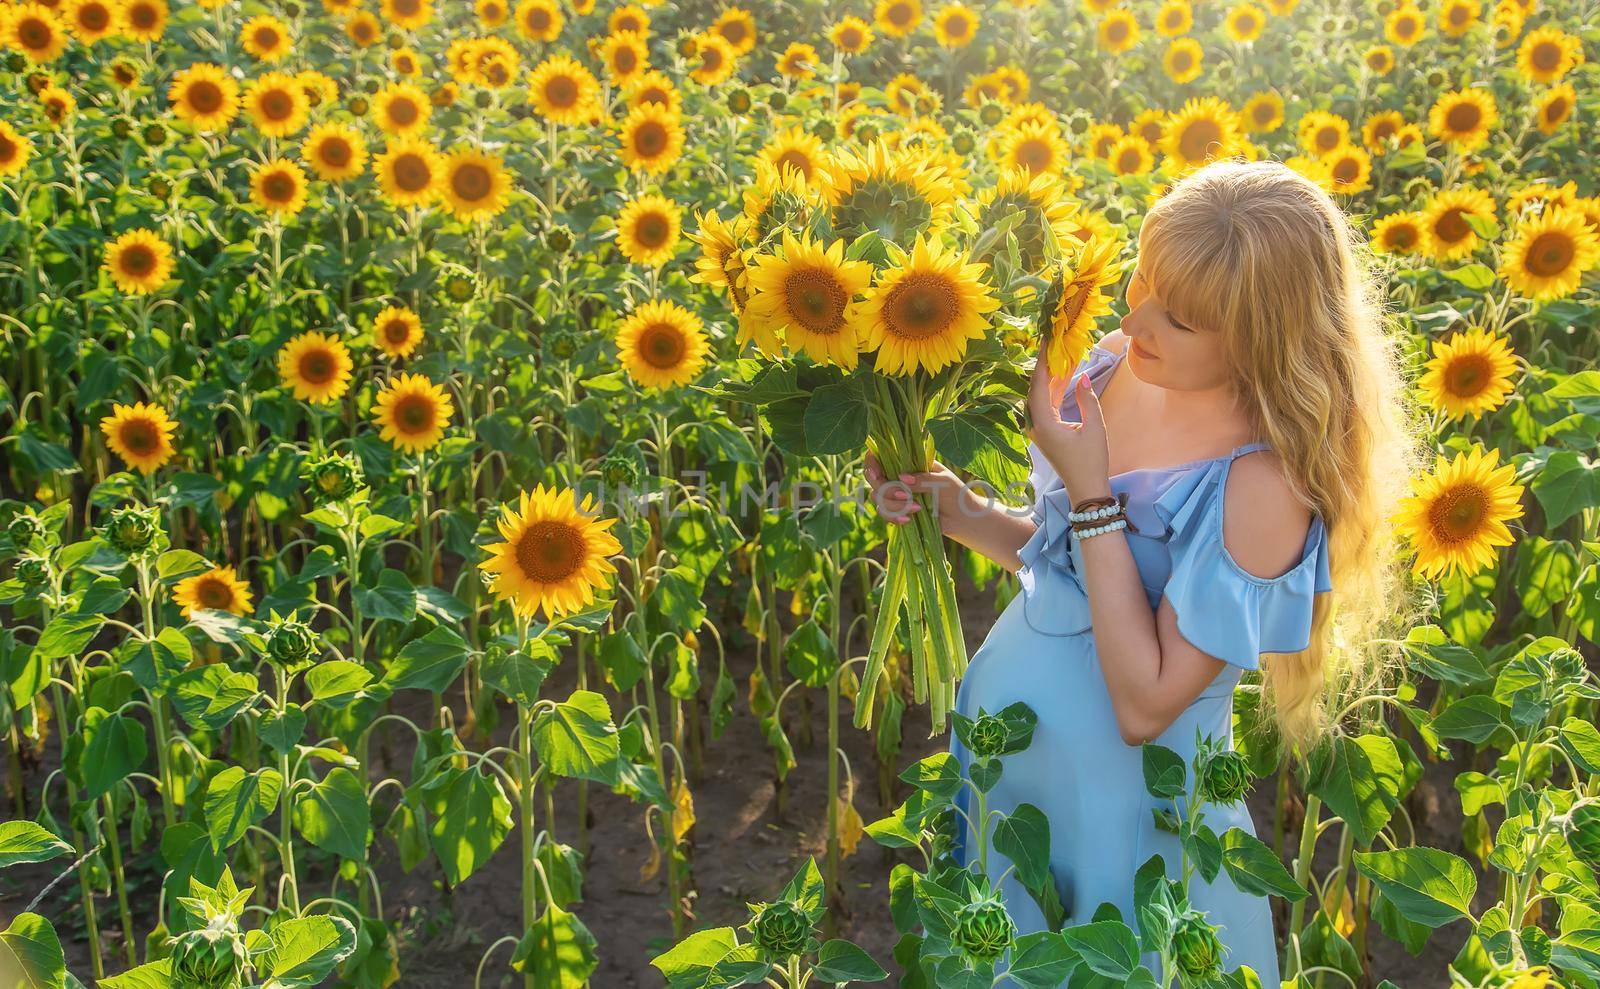 A pregnant woman in a field of sunflowers. Selective focus. by yanadjana